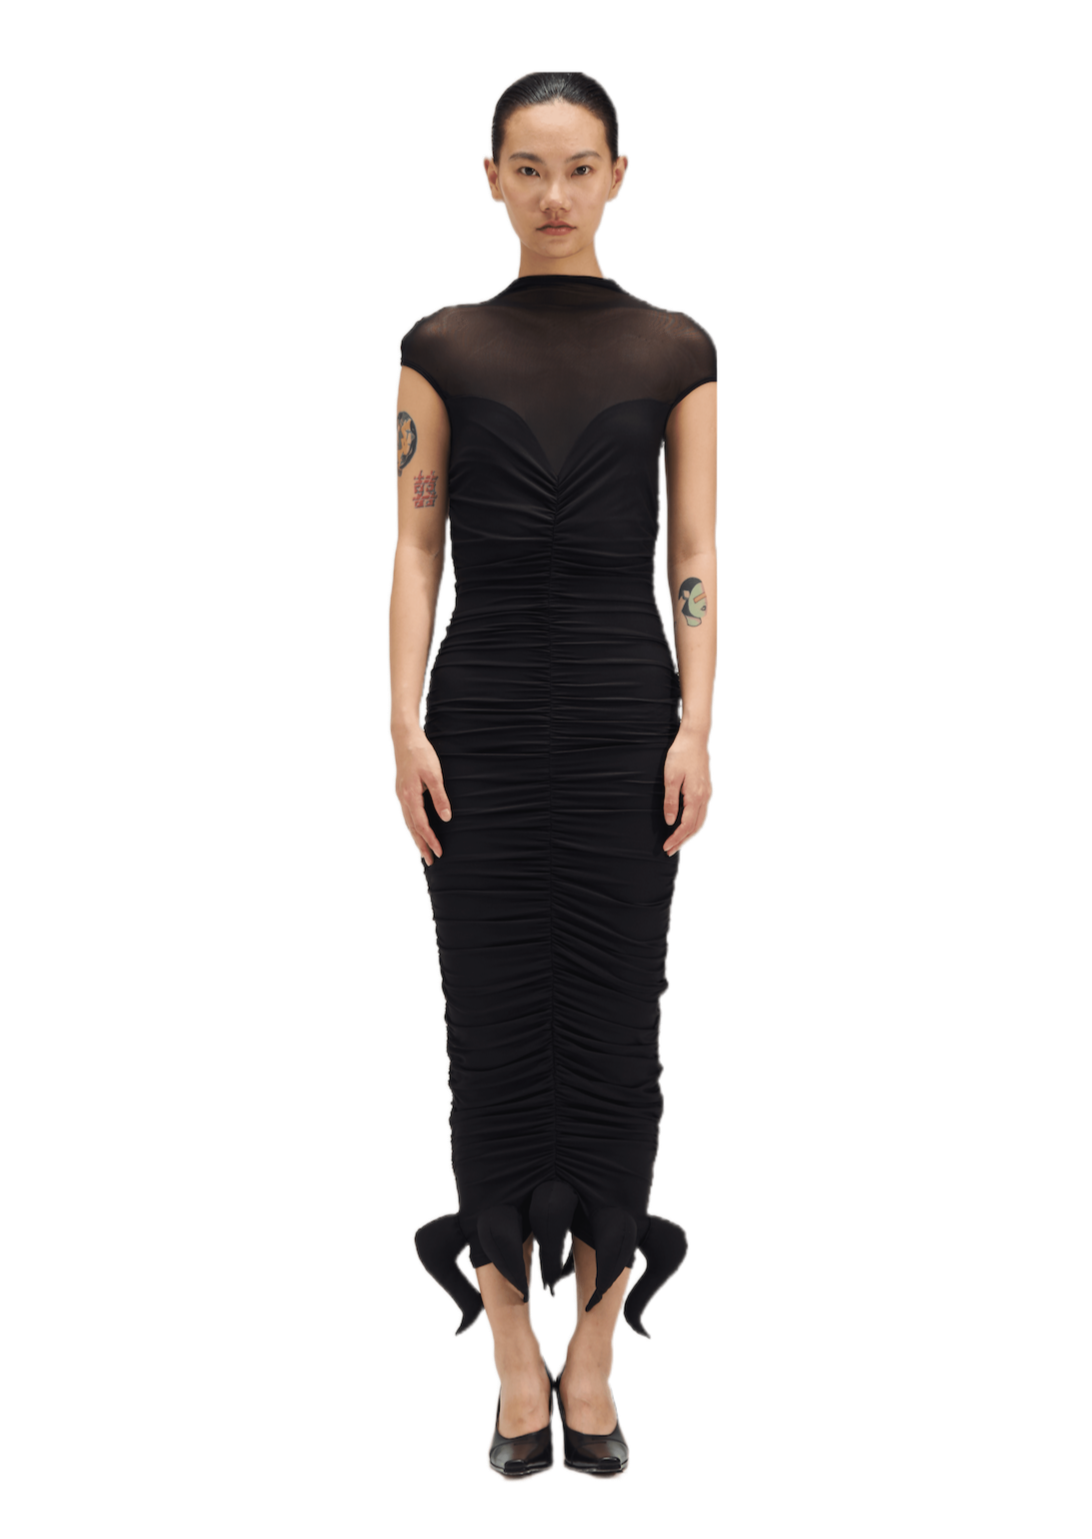 Ruched Mesh Octopus Dress